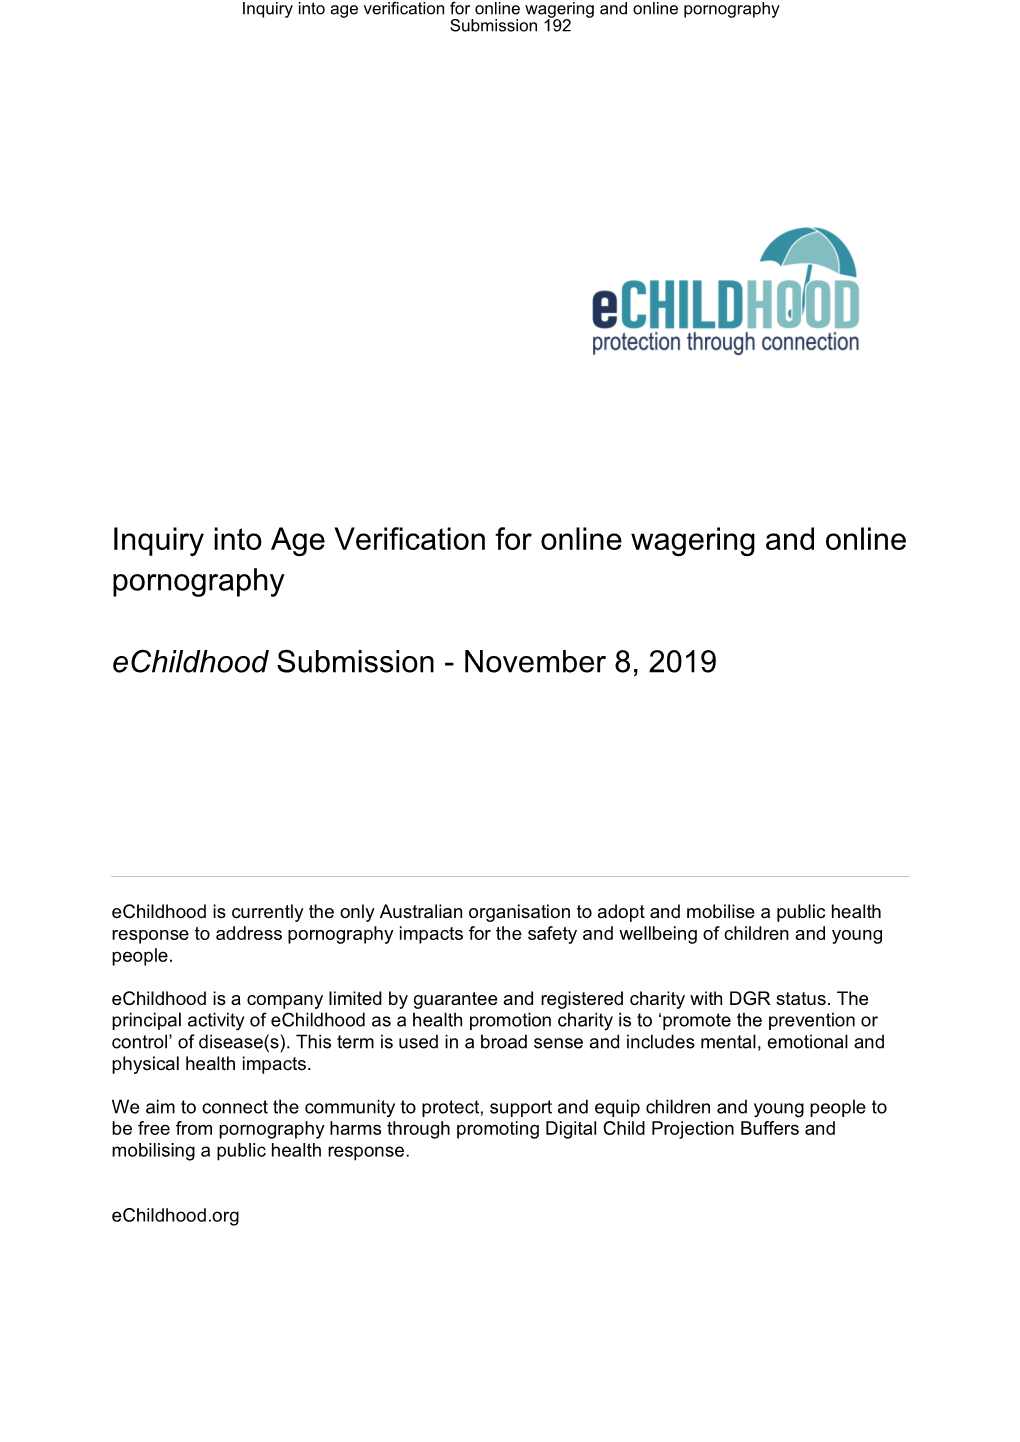 Inquiry Into Age Verification for Online Wagering and Online Pornography Submission 192